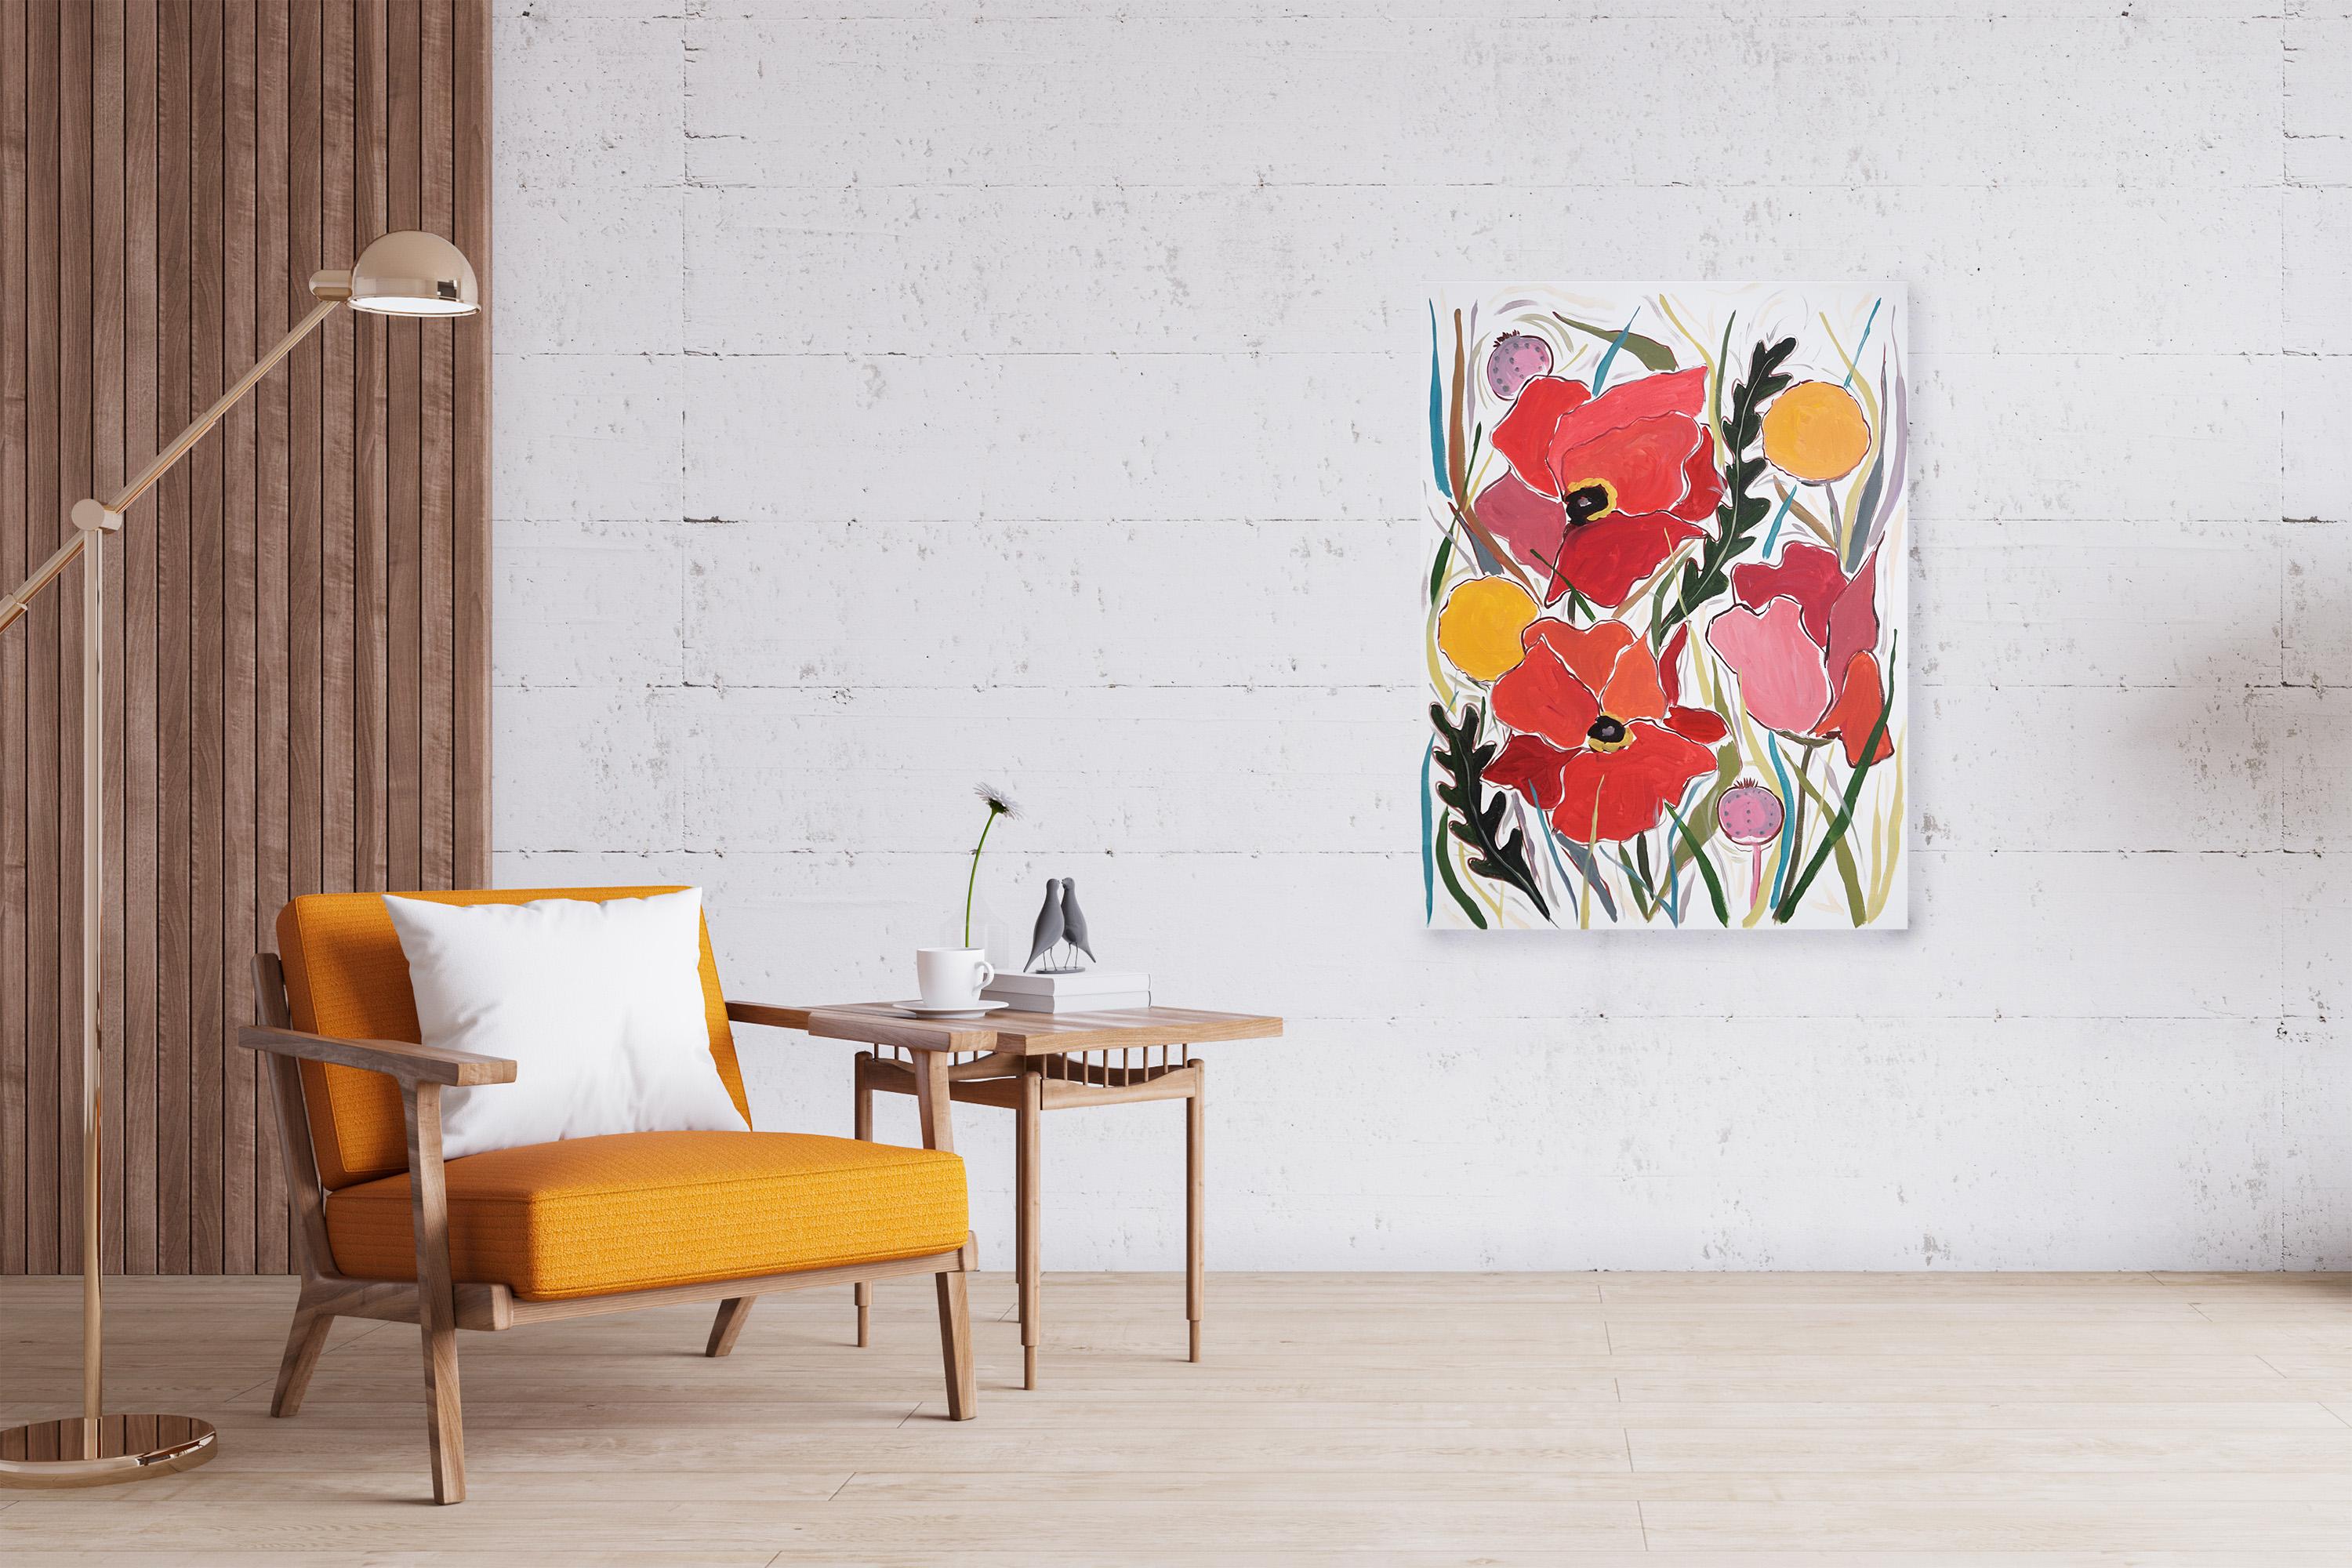 Red Giant Poppies and Yellow Craspedia Flowers on Canvas, Illustration Prairie - Painting by Romina Milano